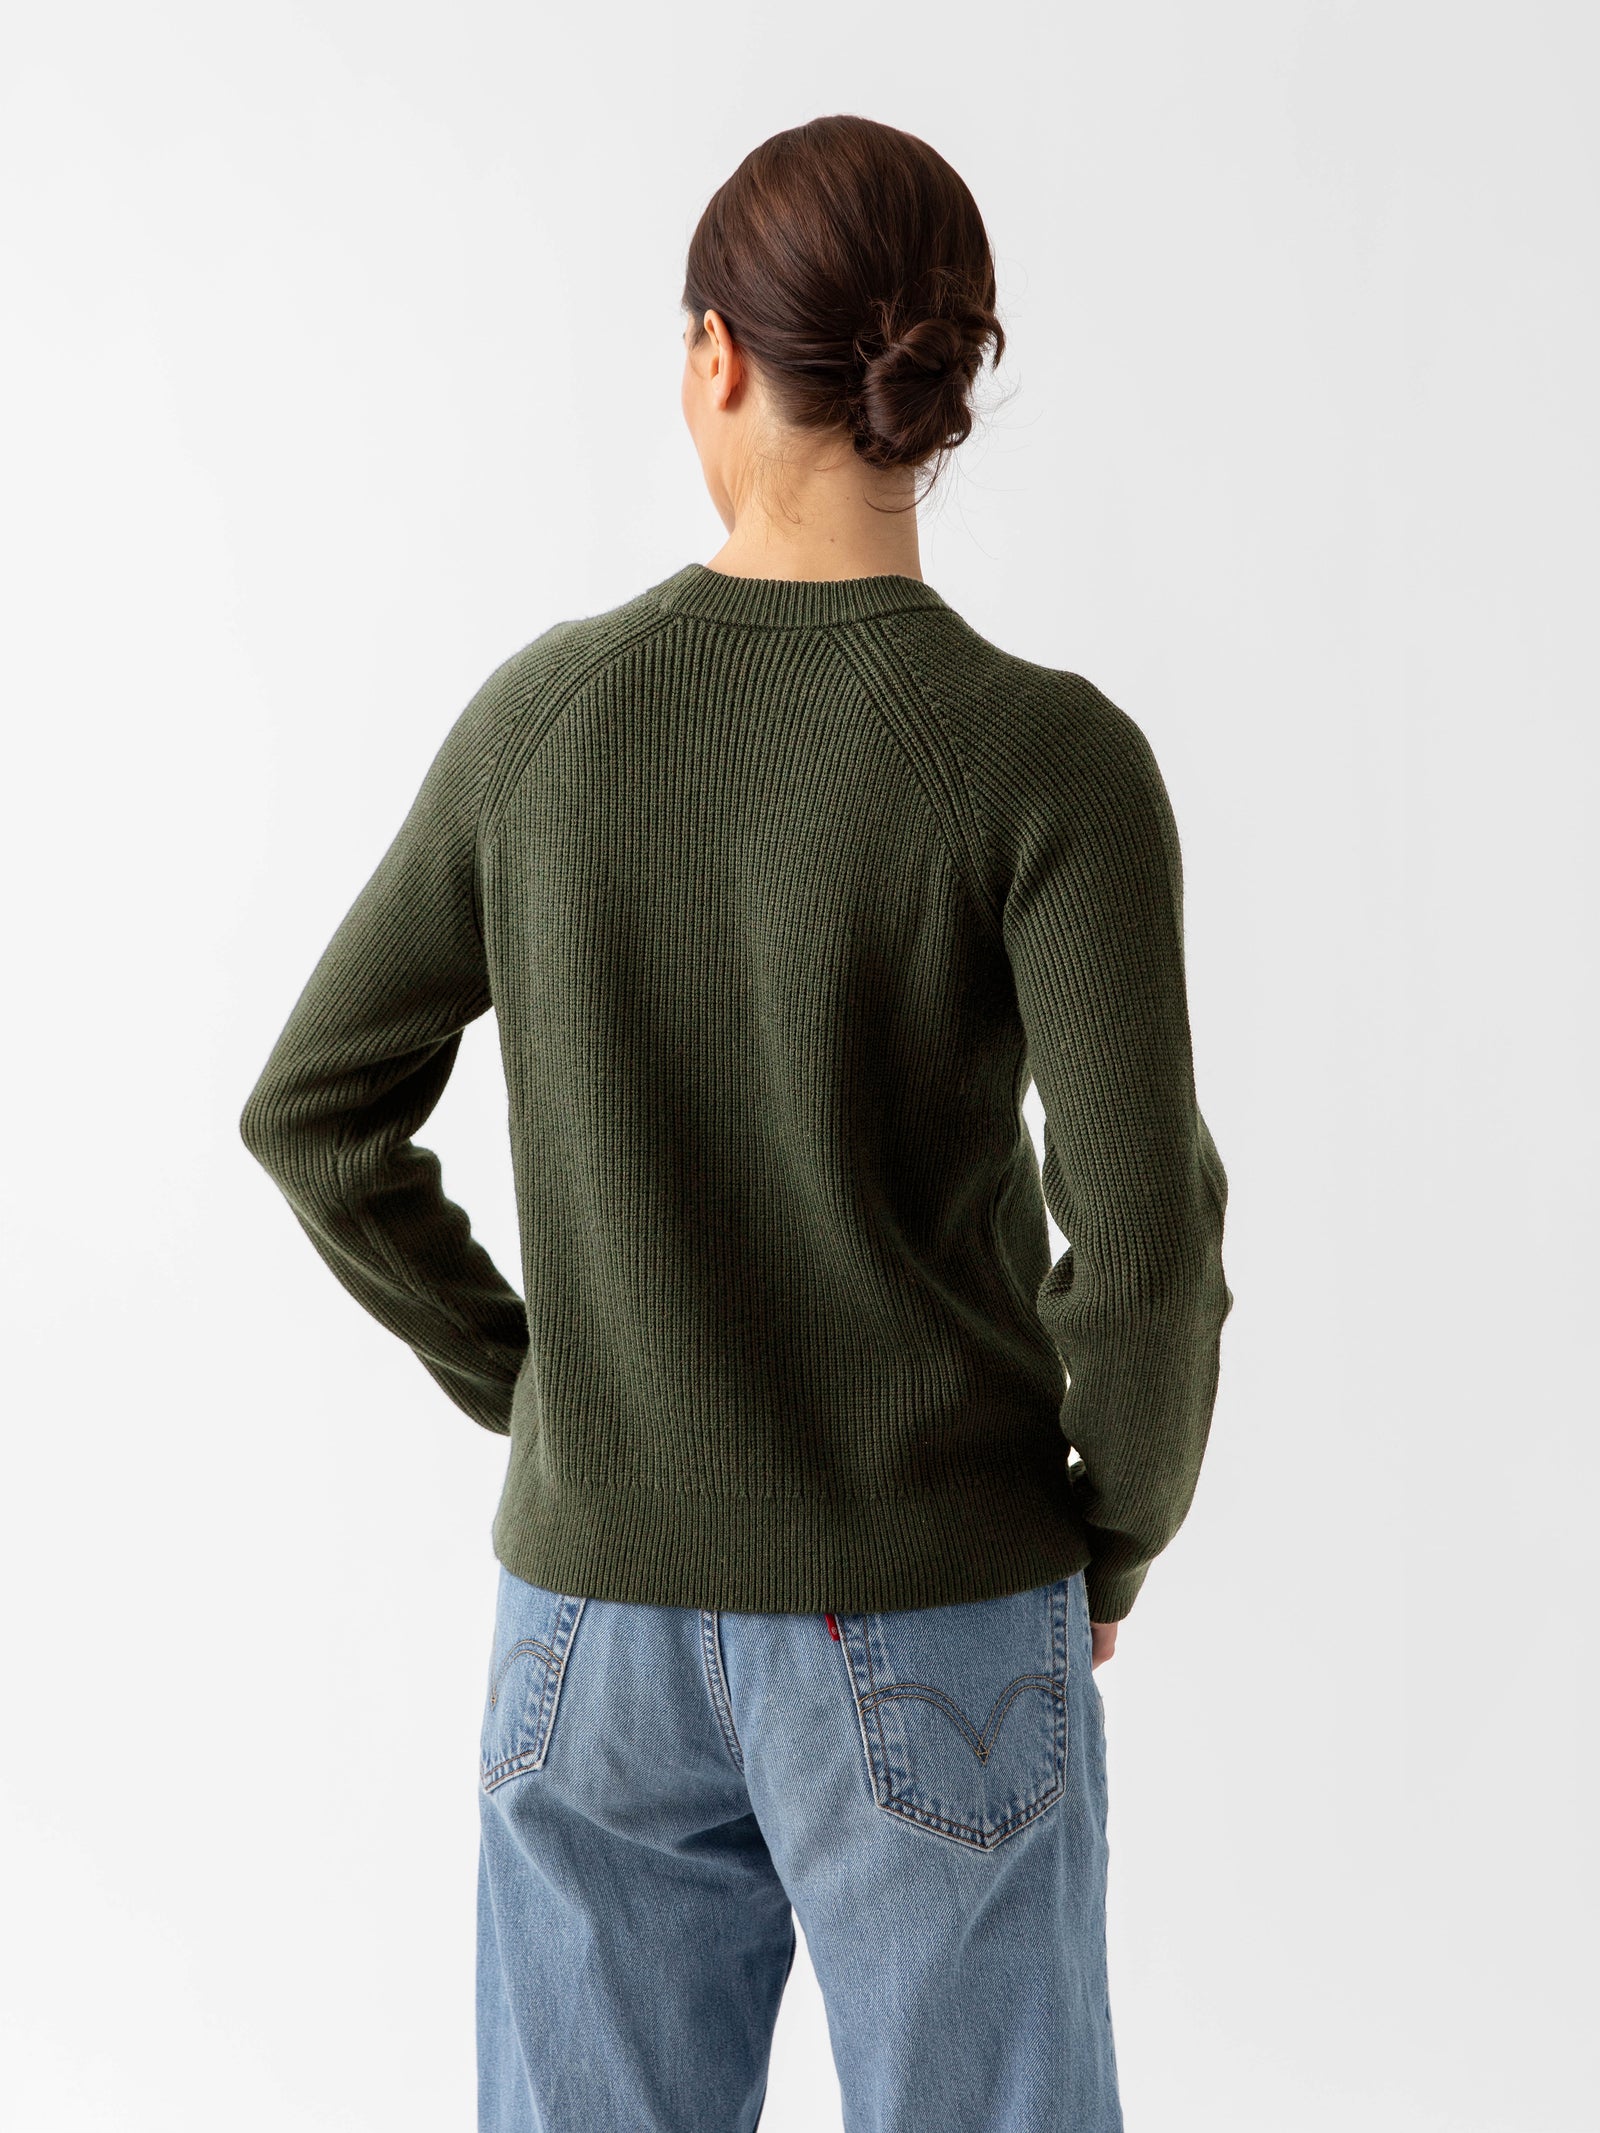 Back of woman wearing juniper classic crewneck and jeans with white background 